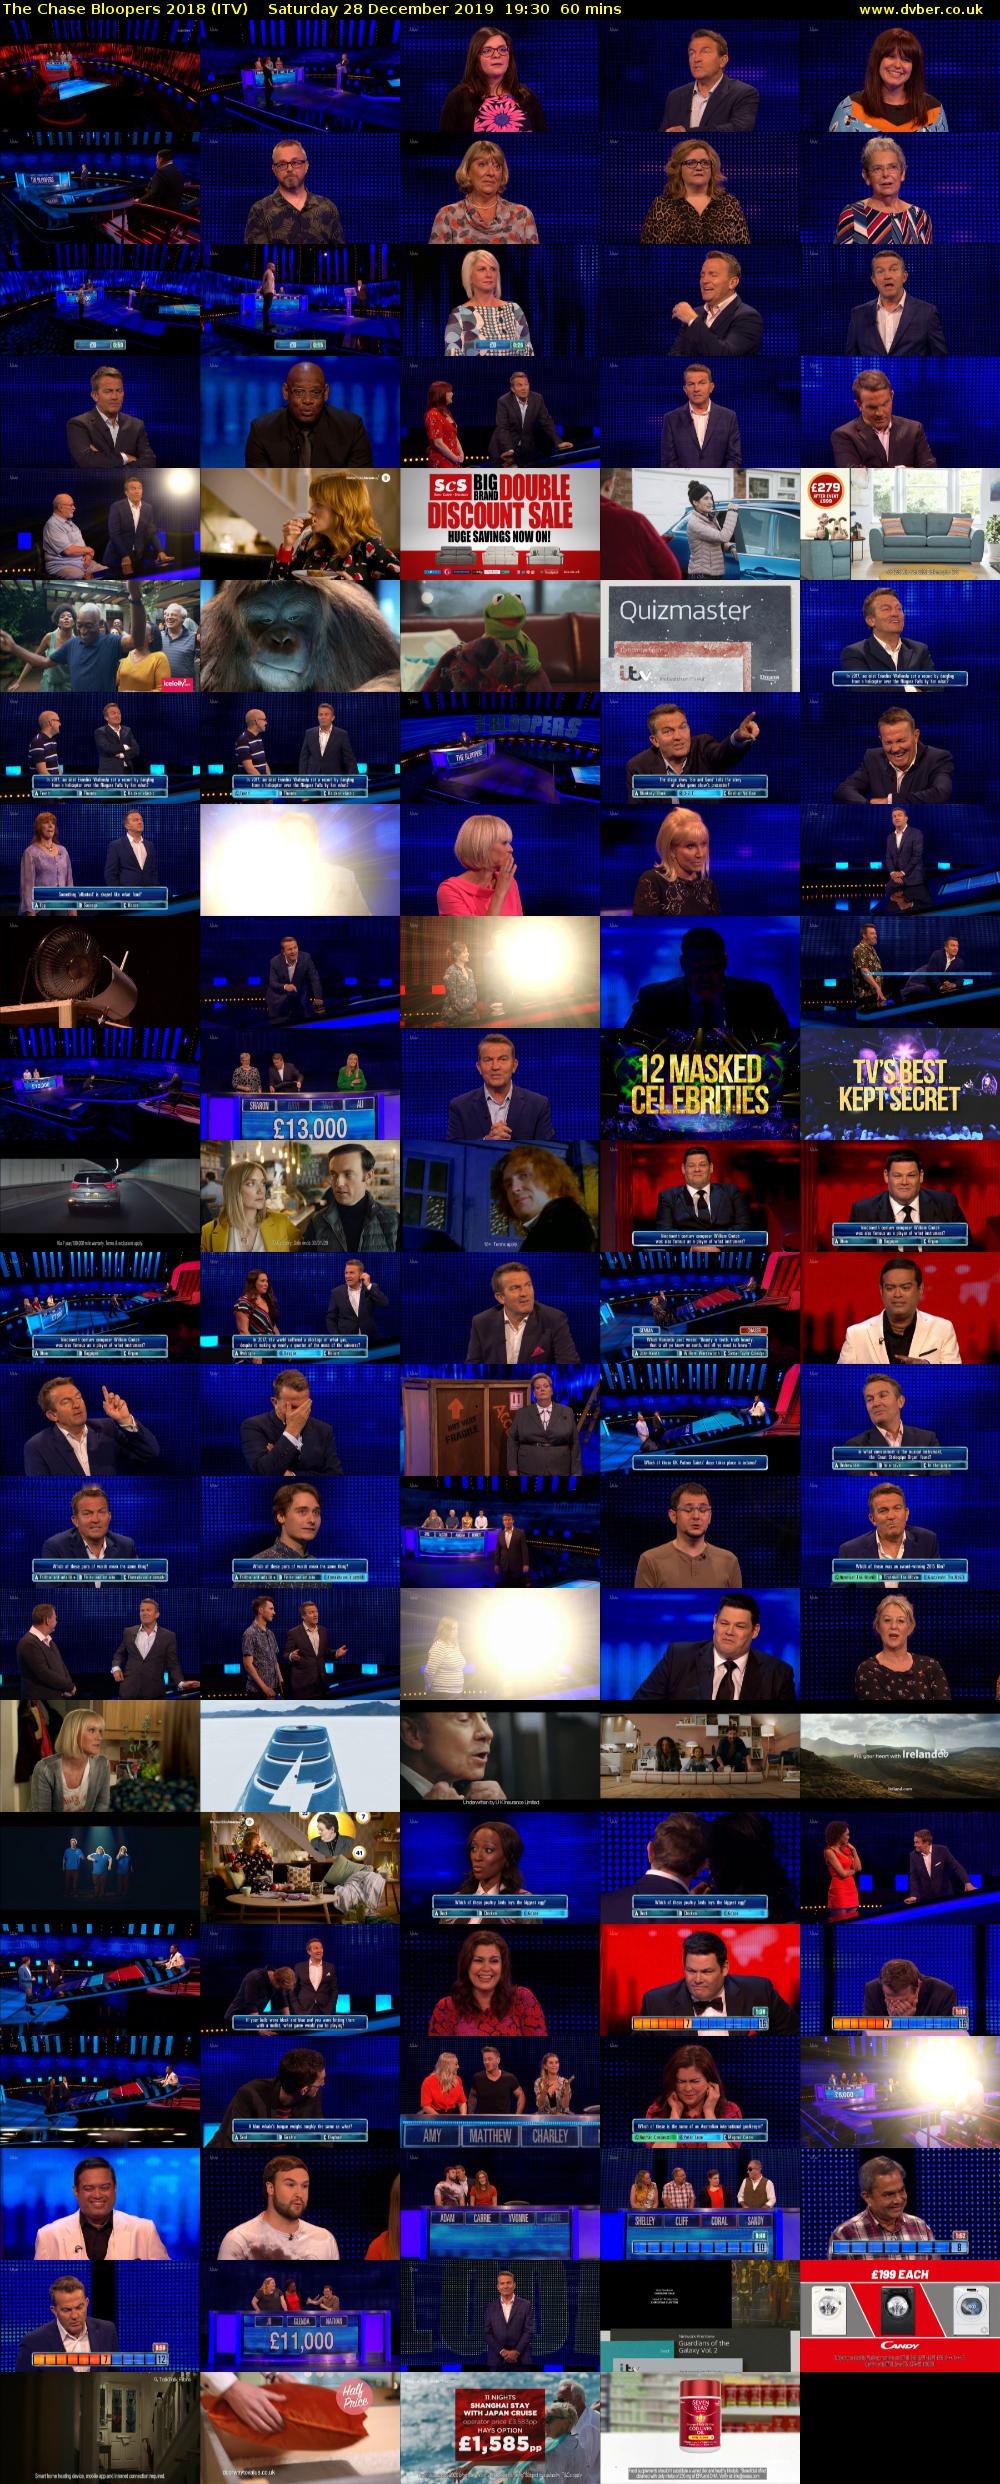 The Chase Bloopers 2018 (ITV) Saturday 28 December 2019 19:30 - 20:30